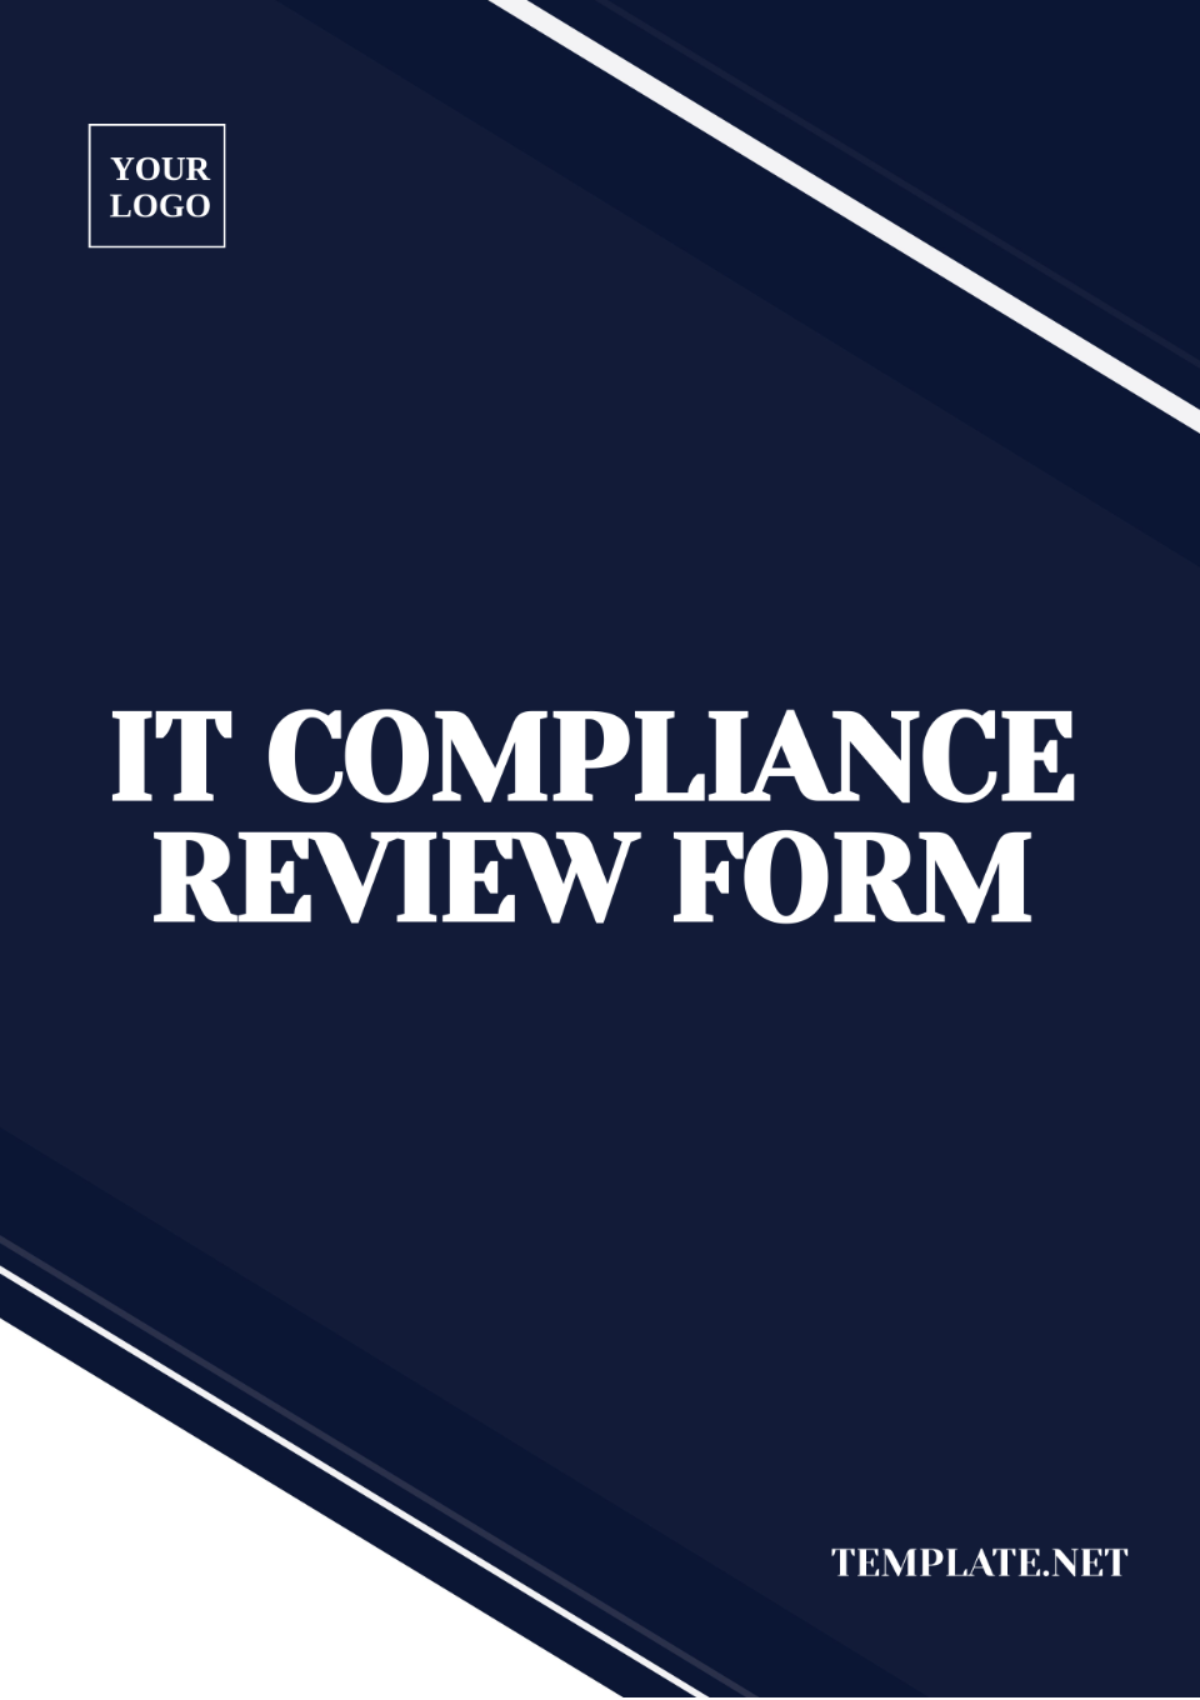 Free IT Compliance Review Form Template